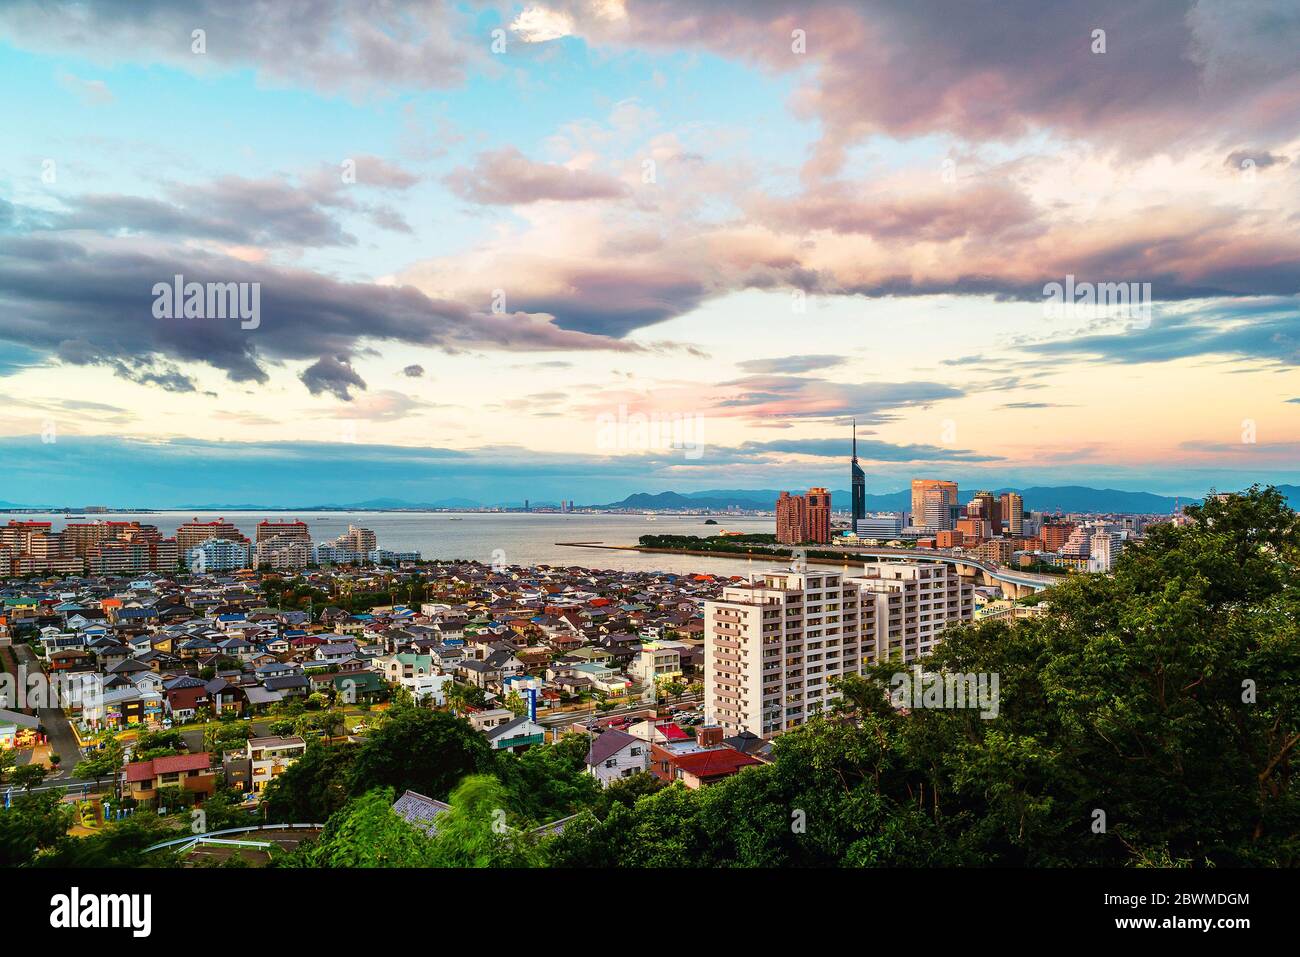 Fukuoka, Japan. A sunset with a view of central Fukuoka, Japan, with tall modern buildings standing by the Hakata Bay on a cloudy summer night Stock Photo